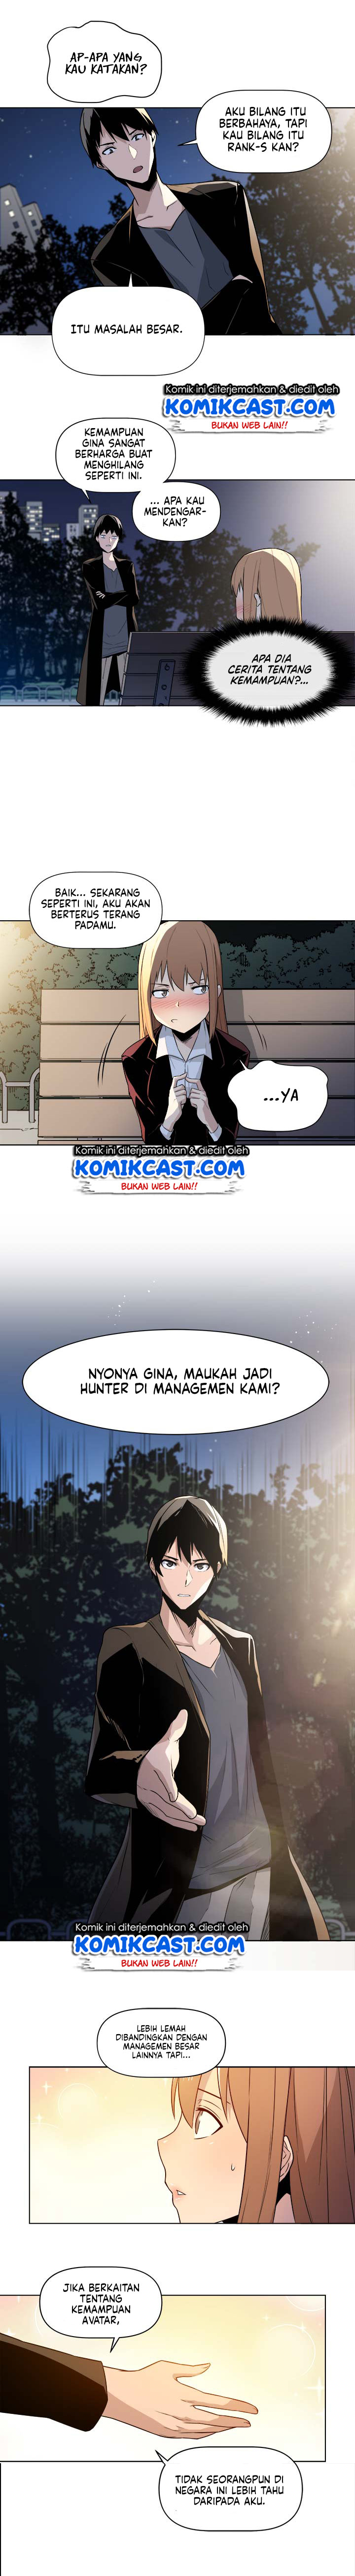 The Strongest Manager In History Chapter 8